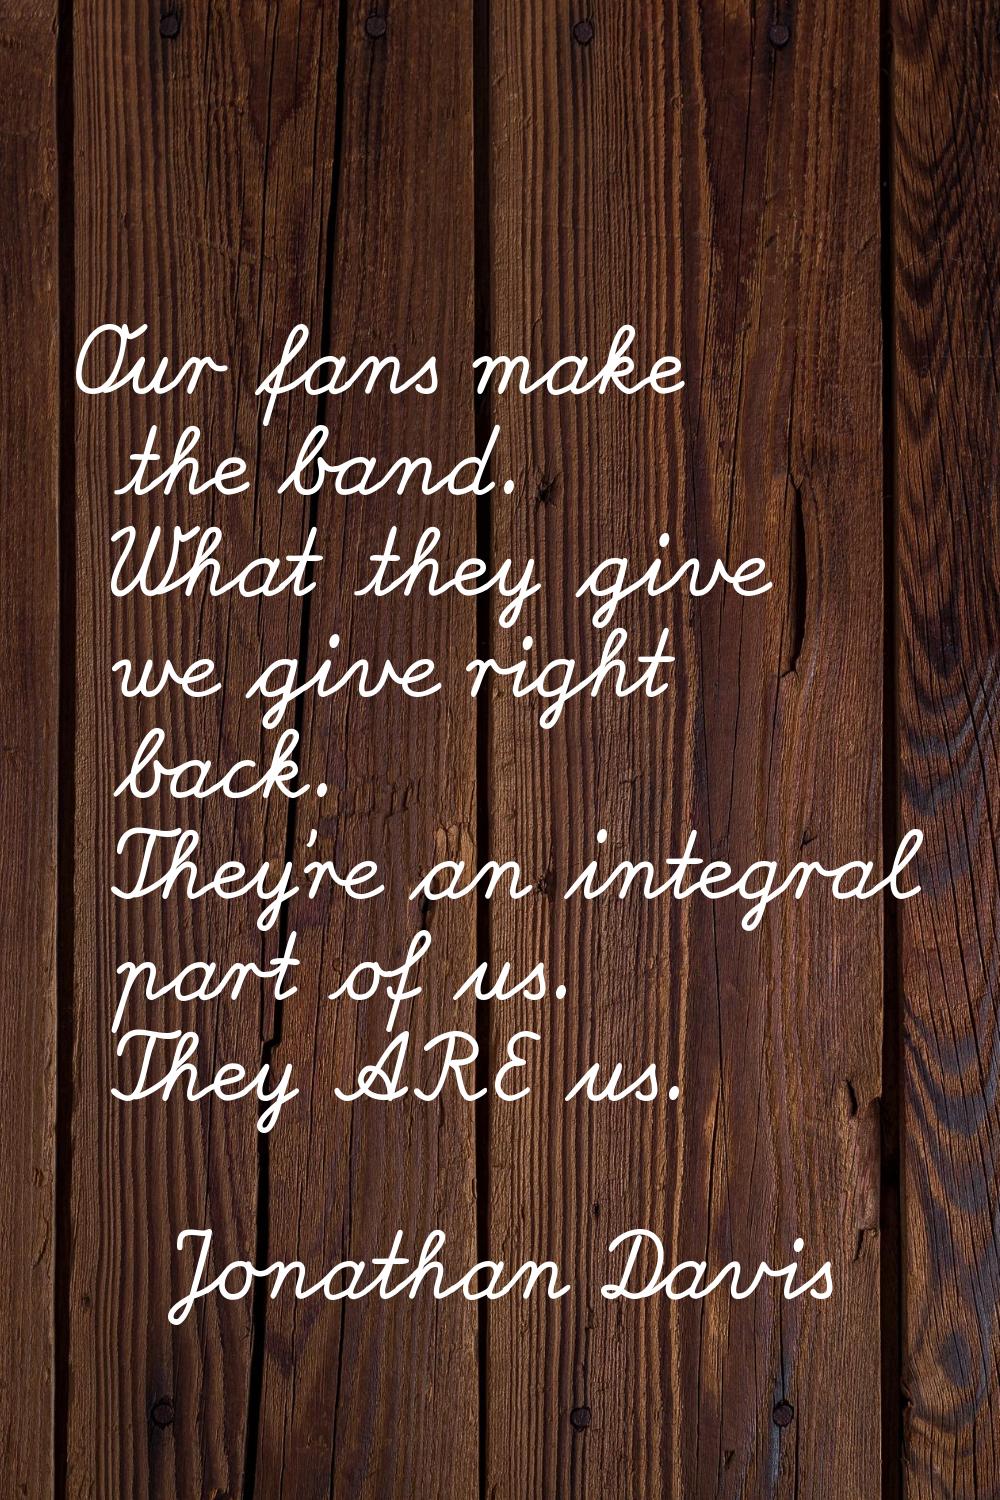 Our fans make the band. What they give we give right back. They're an integral part of us. They ARE